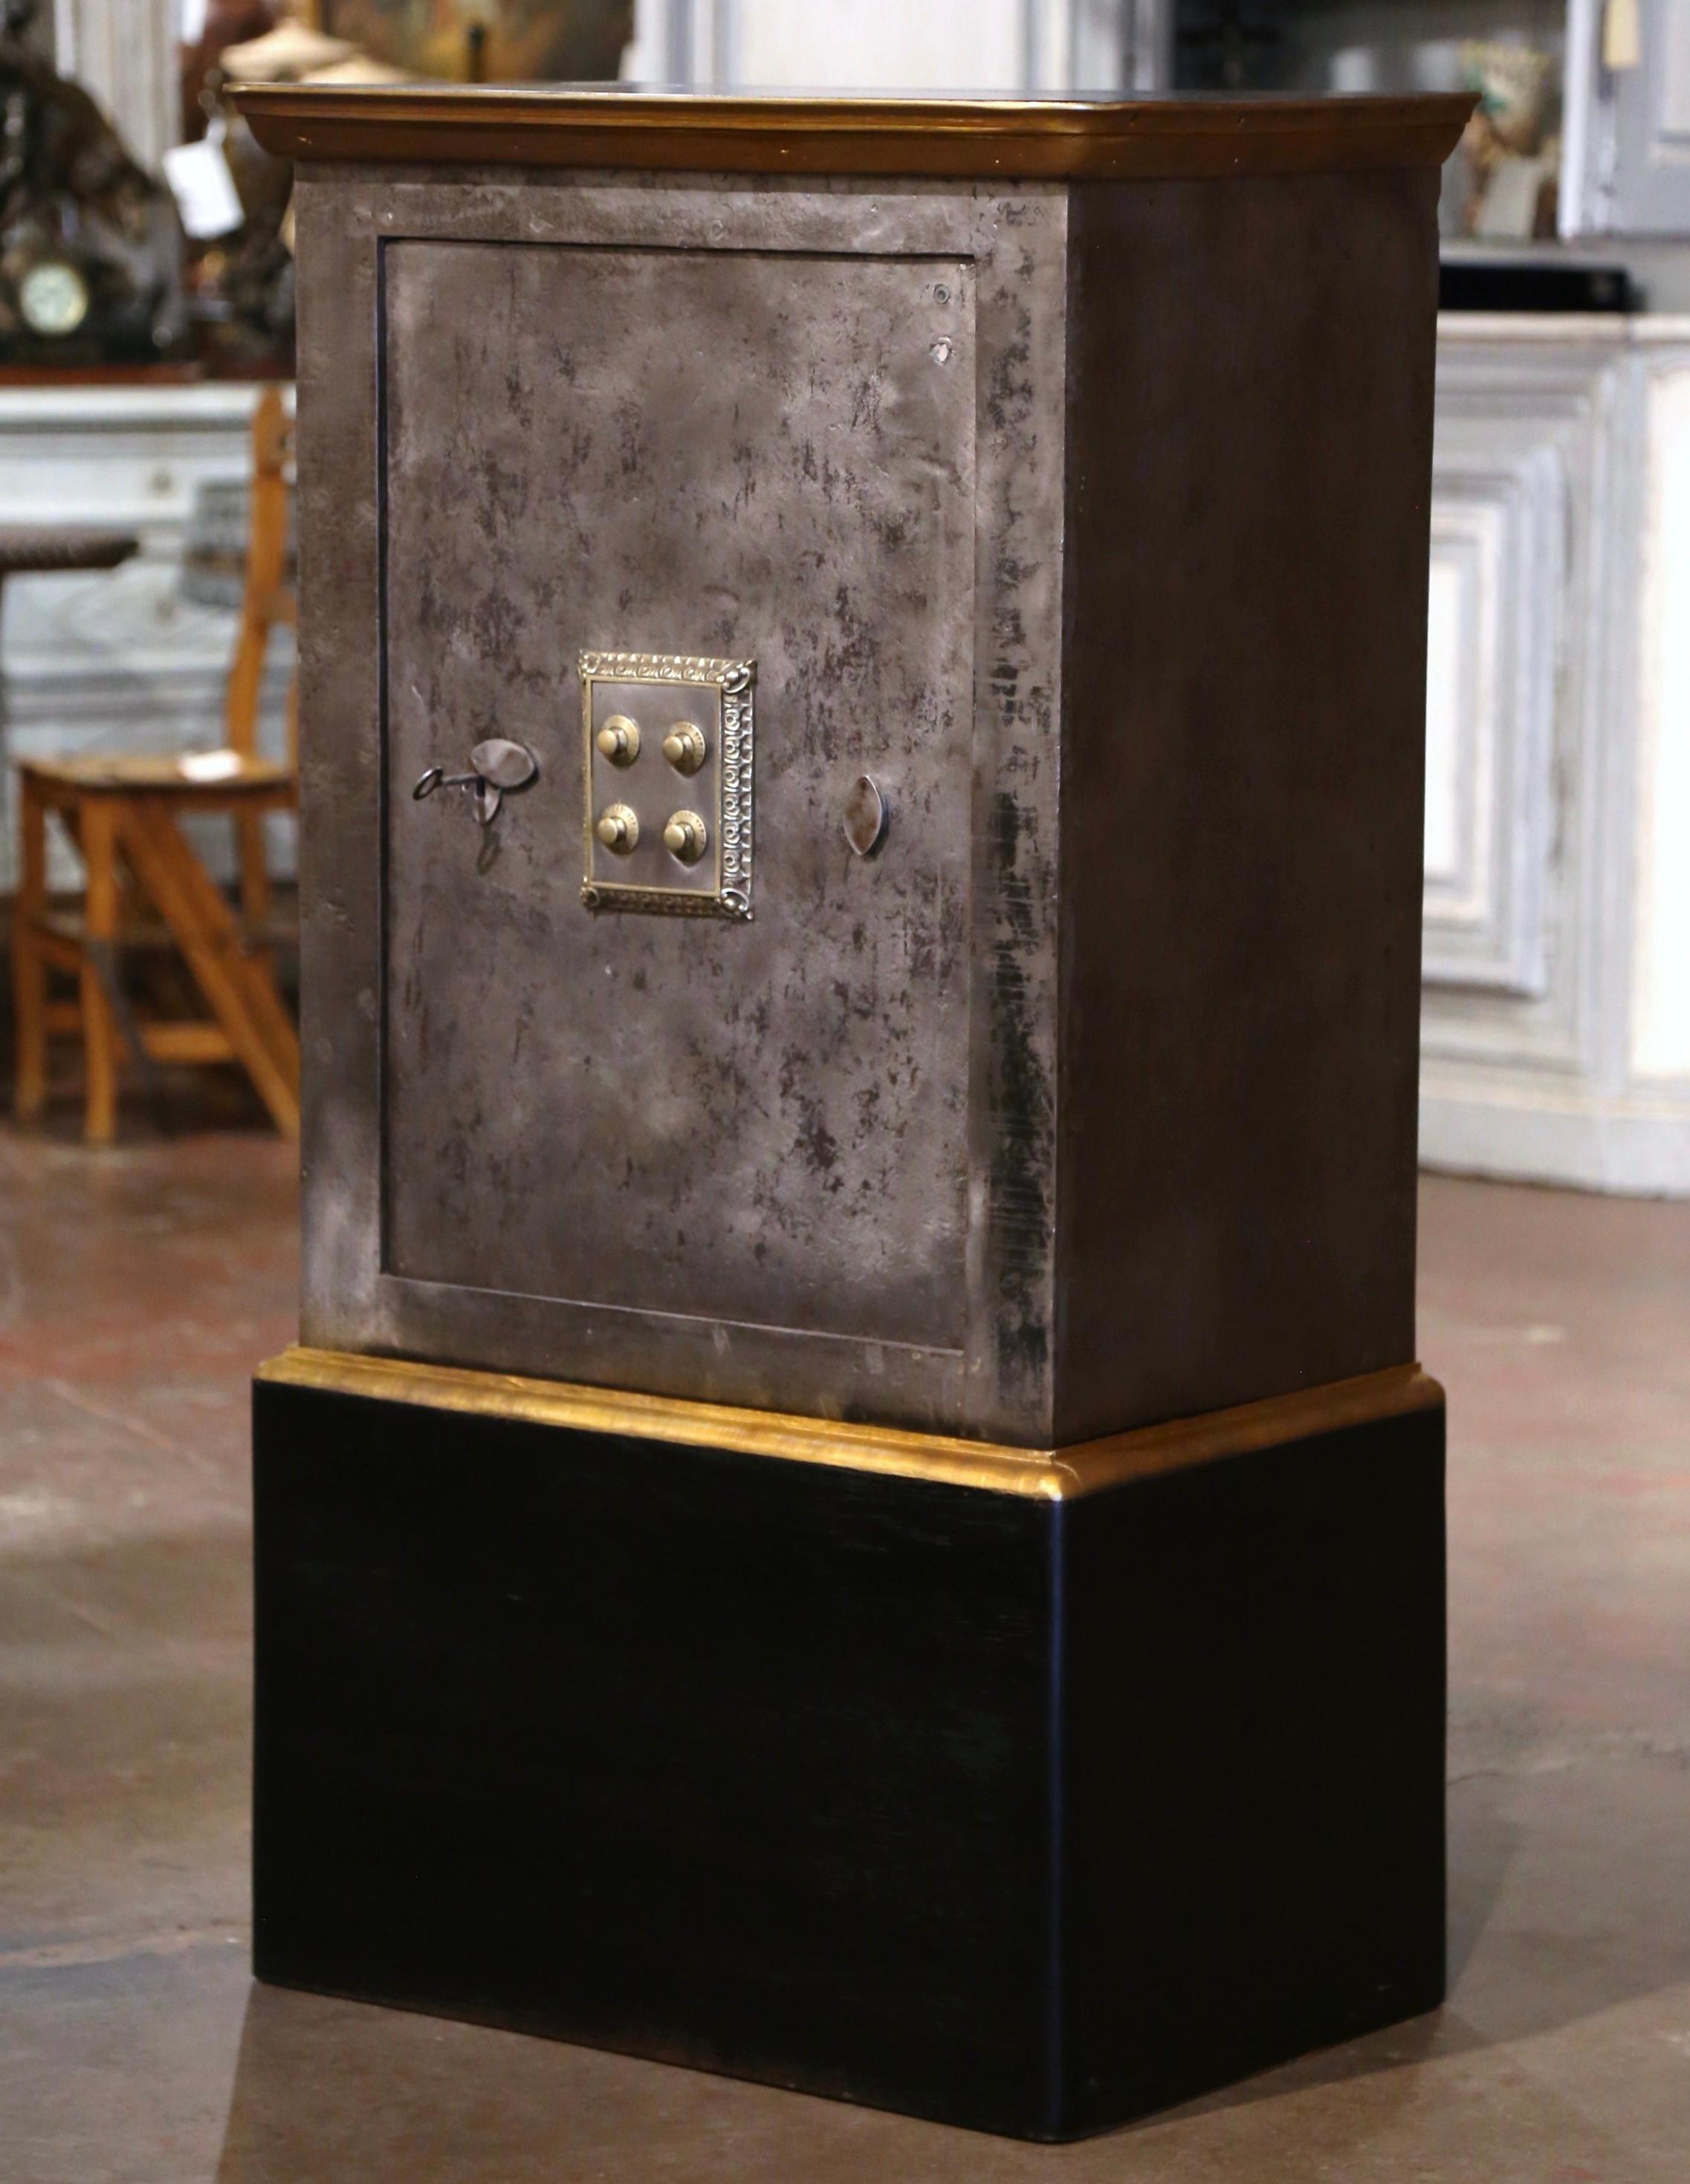 This antique wooden and iron safe, was crafted in Paris, France, circa 1870. The black painted and polished iron safe stands on a separate carved oak base decorated with a straight bottom plinth. The safe is topped with a removable oak surface. The